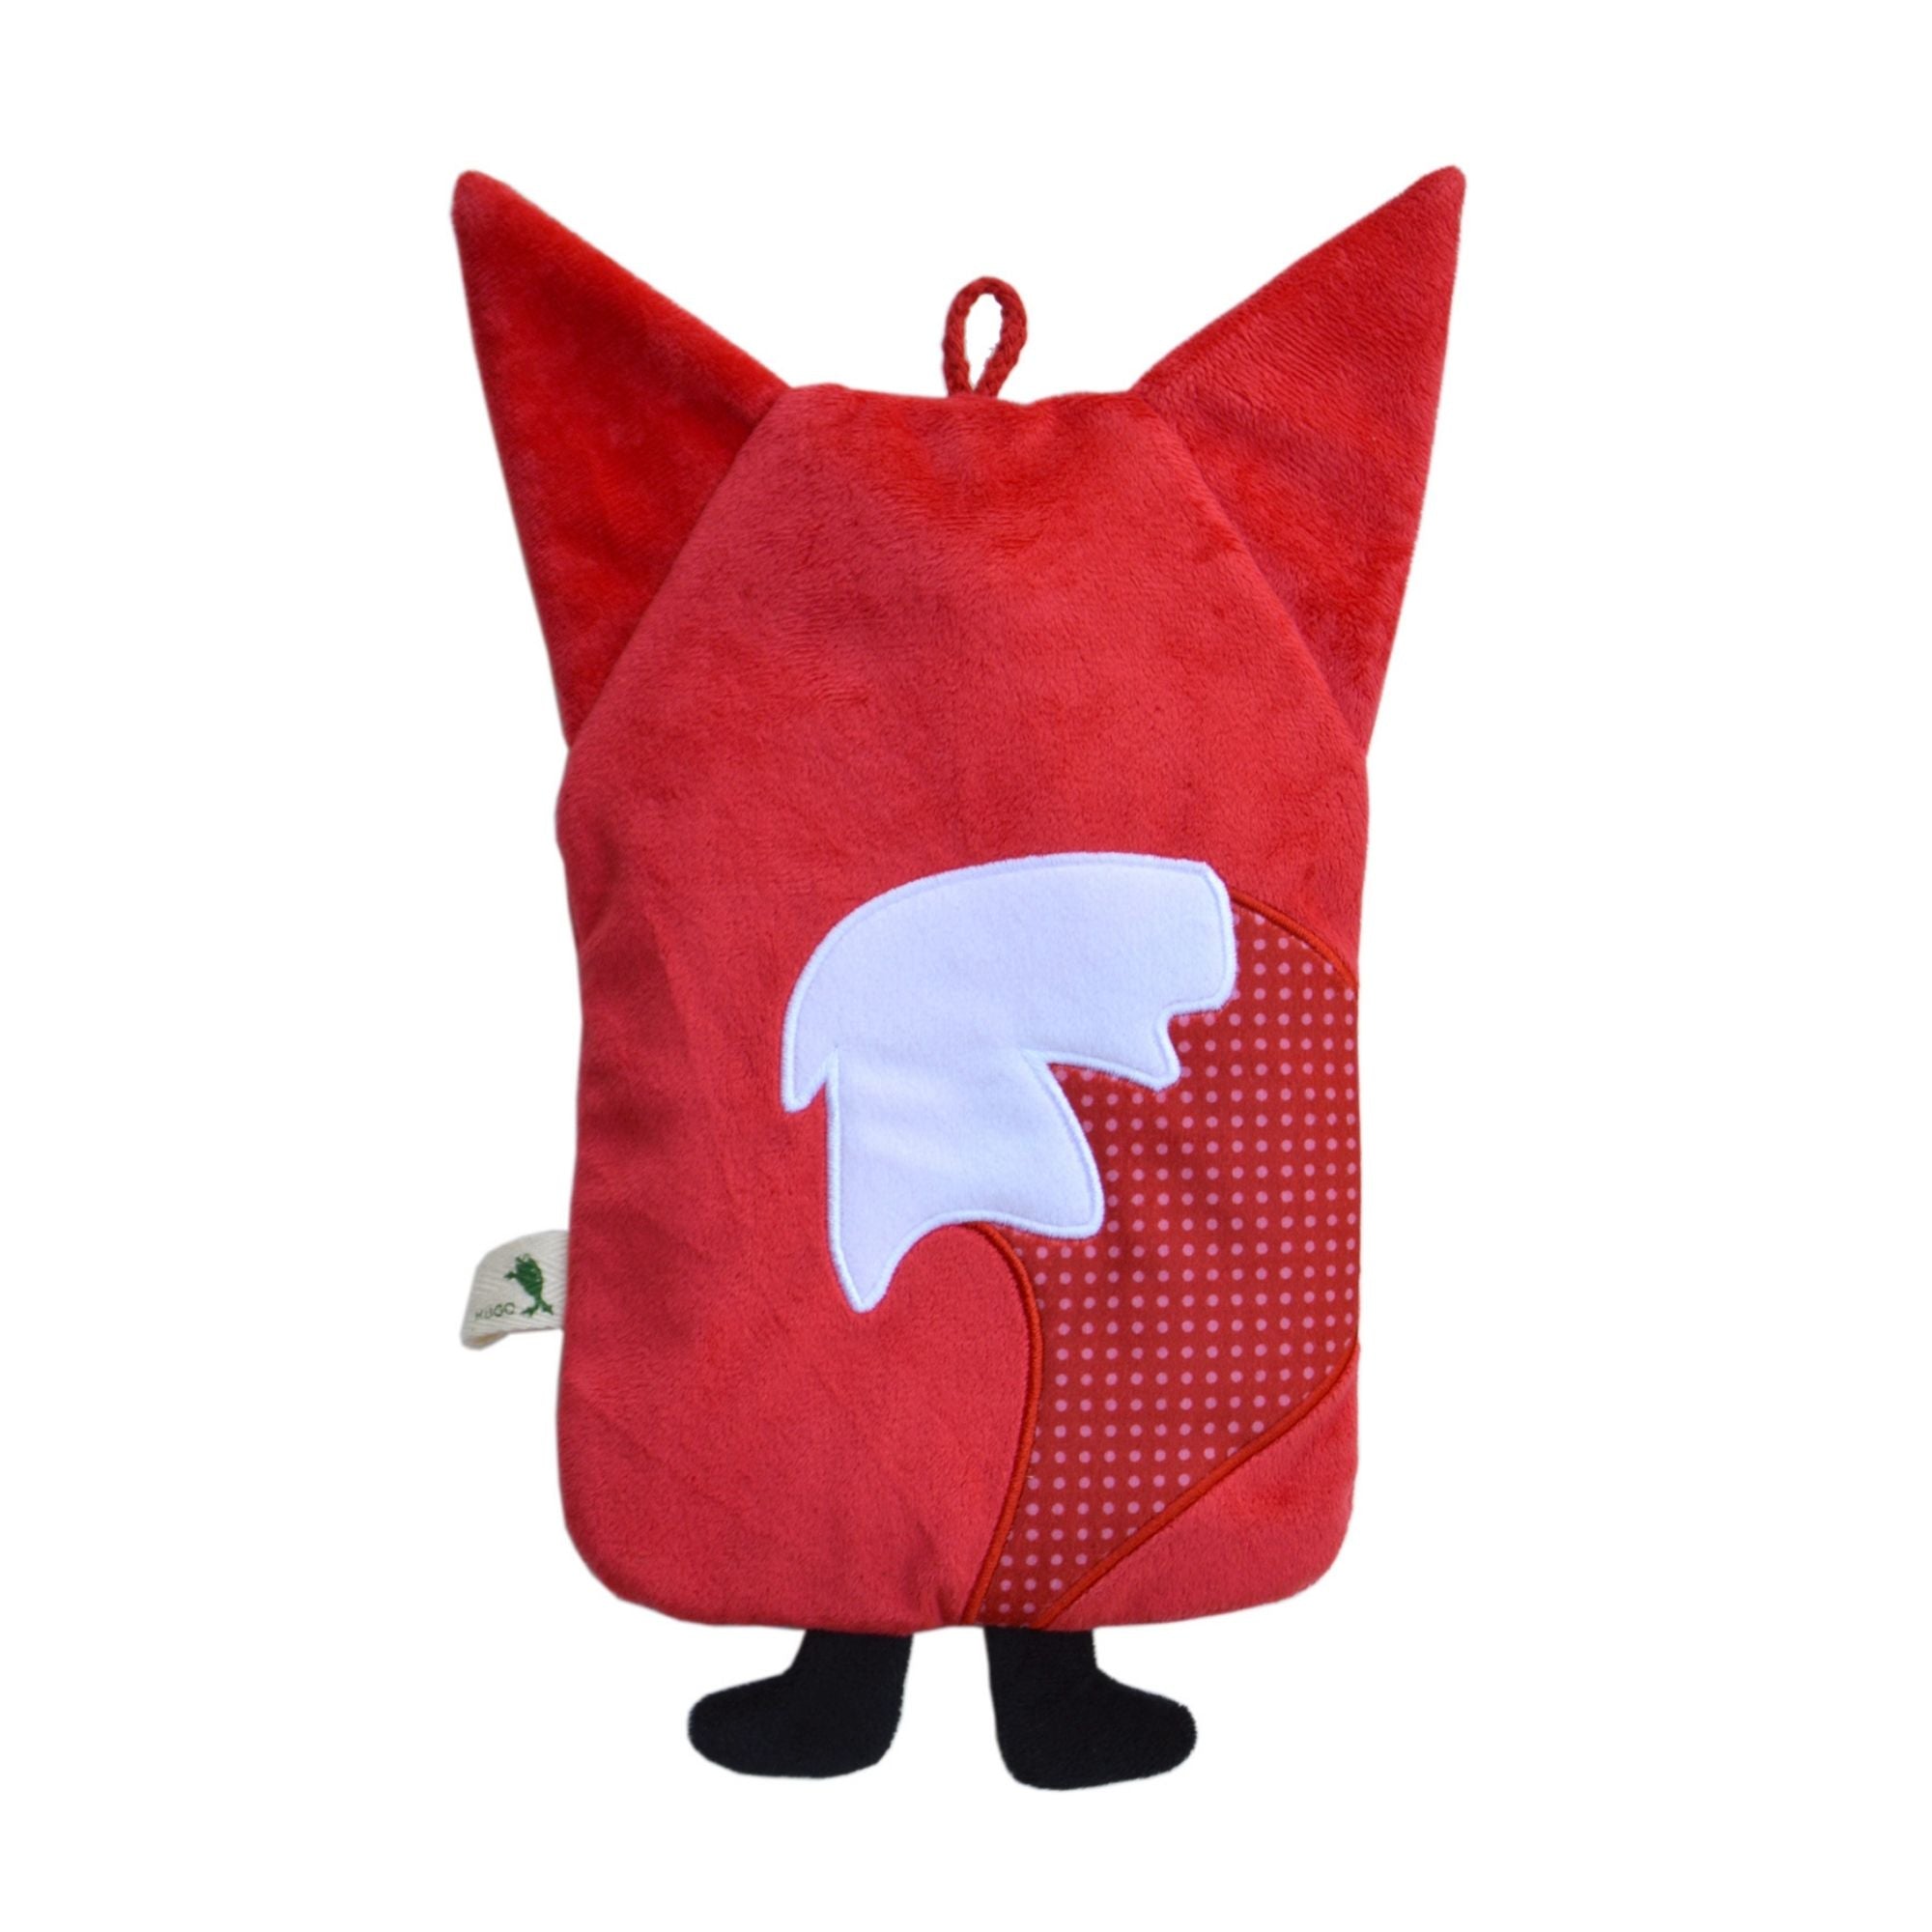 0.8 Litre Eco Hot Water Bottle with Red Fox Cover - Back